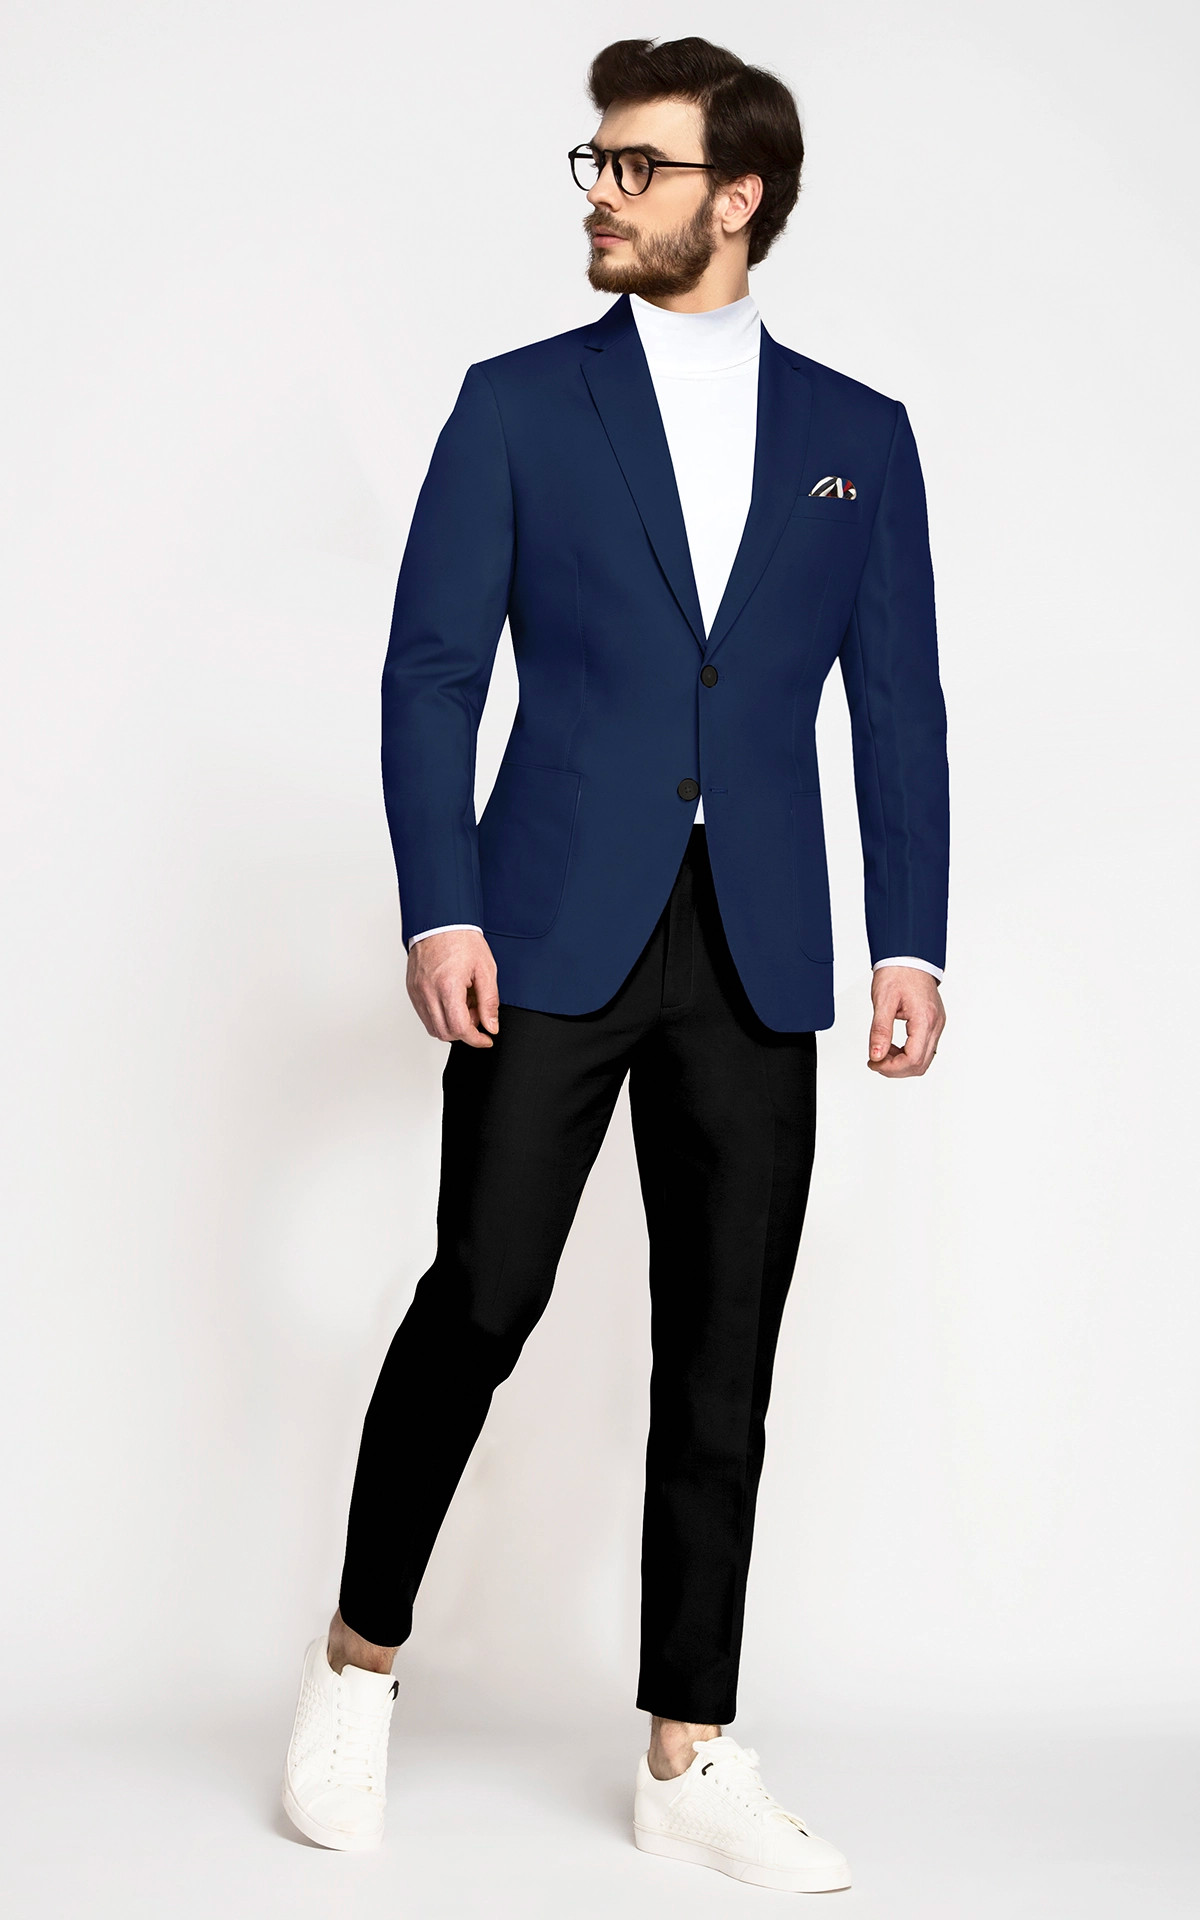 What To Wear With A Blue Blazer? – 35 Men's Blue Blazer Outfit Ideas | Blue  blazer outfit, Blue jacket outfits men, Blue blazer outfit men